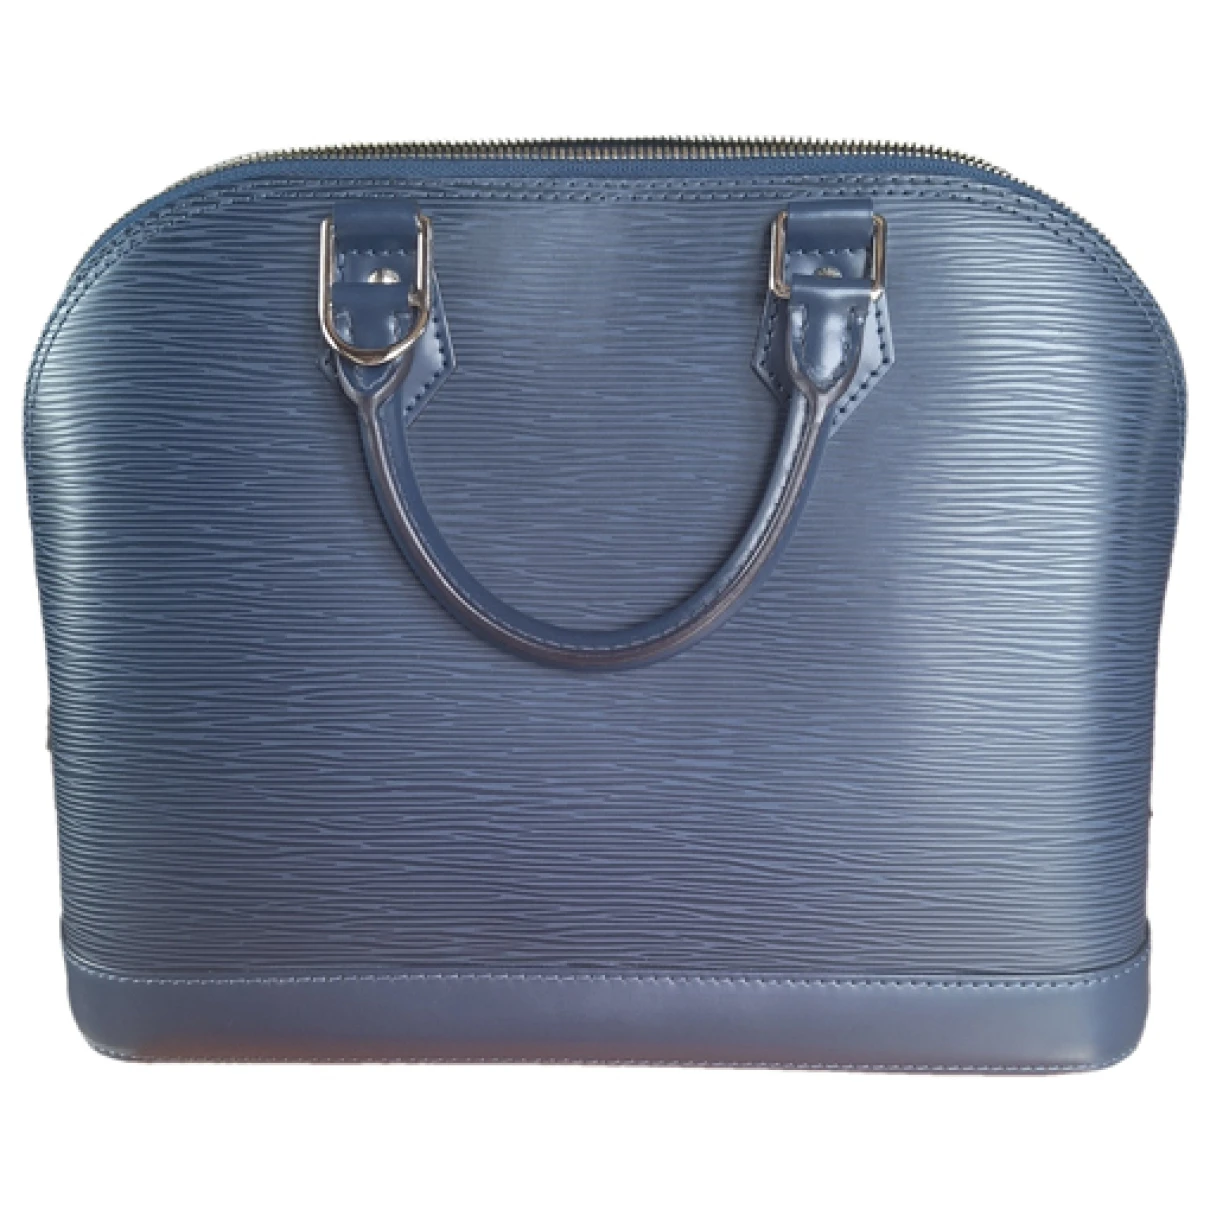 Pre-owned Louis Vuitton Alma Leather Handbag In Blue